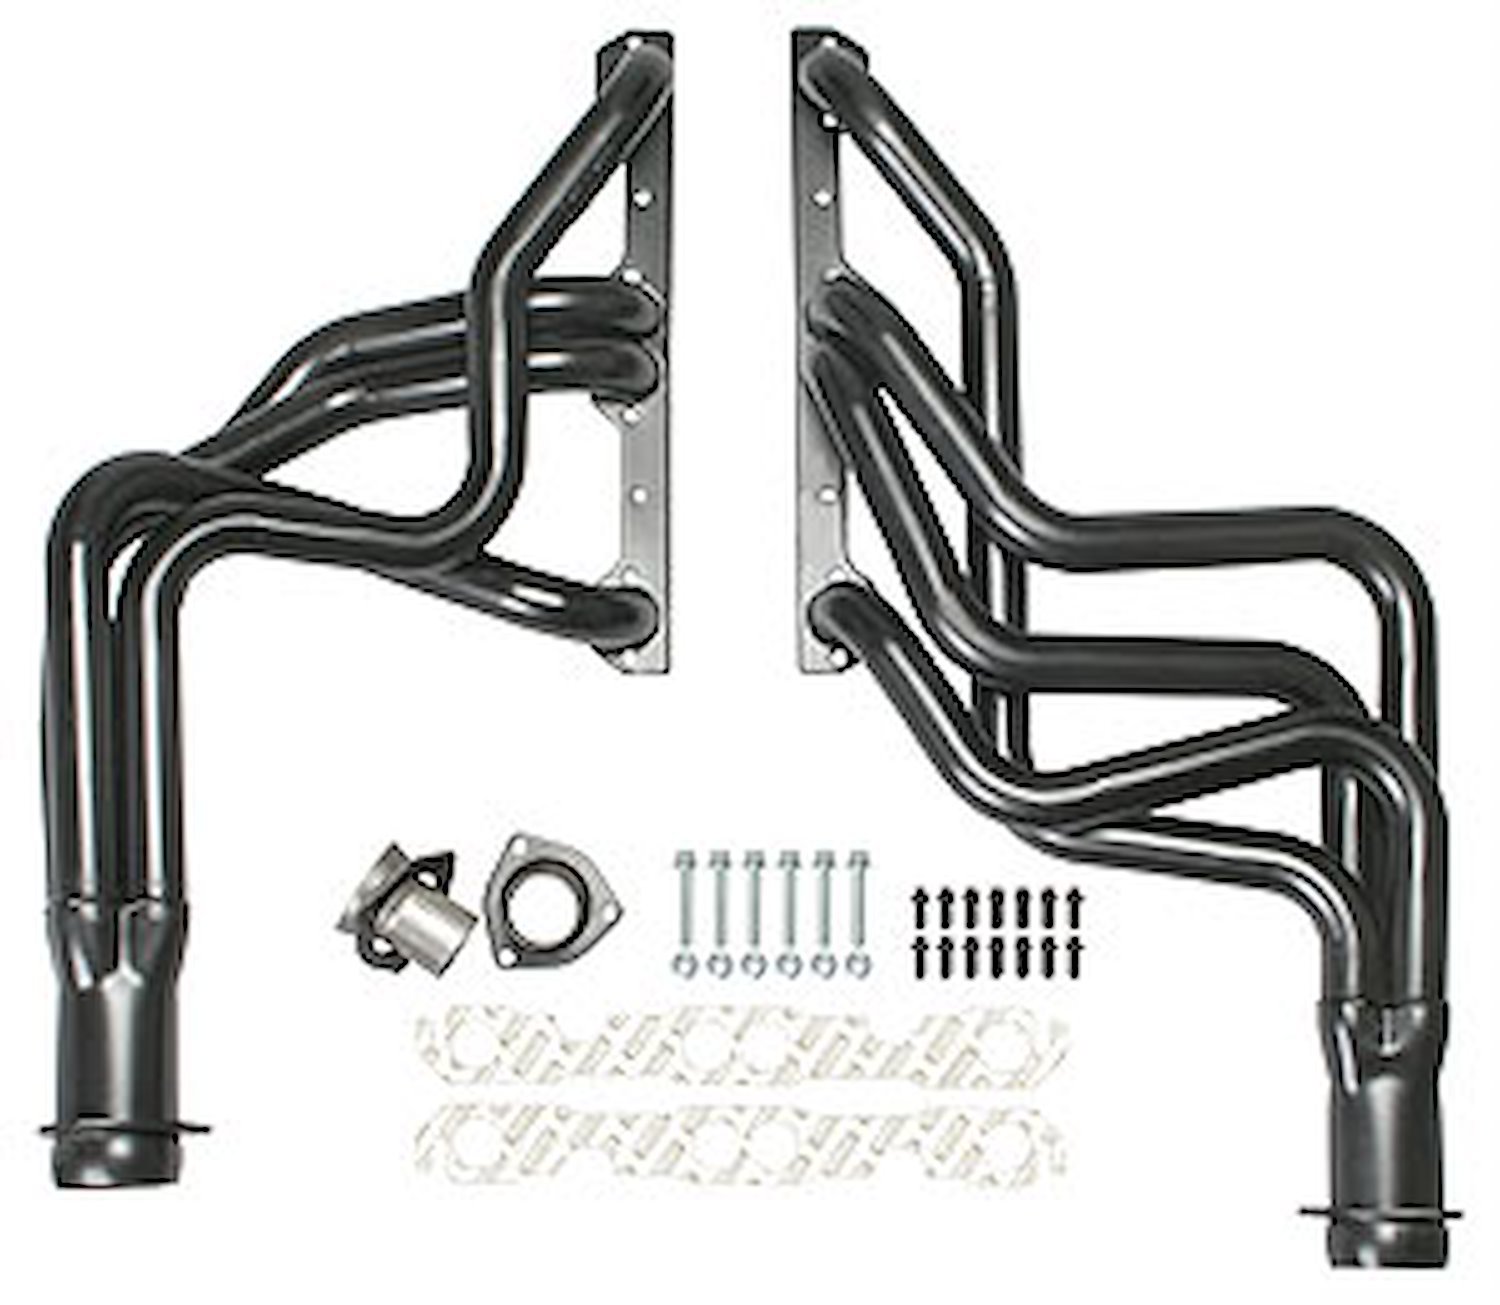 Standard Duty Uncoated Full Length Headers for 1964-77 Chevelle, Malibu, El Camino